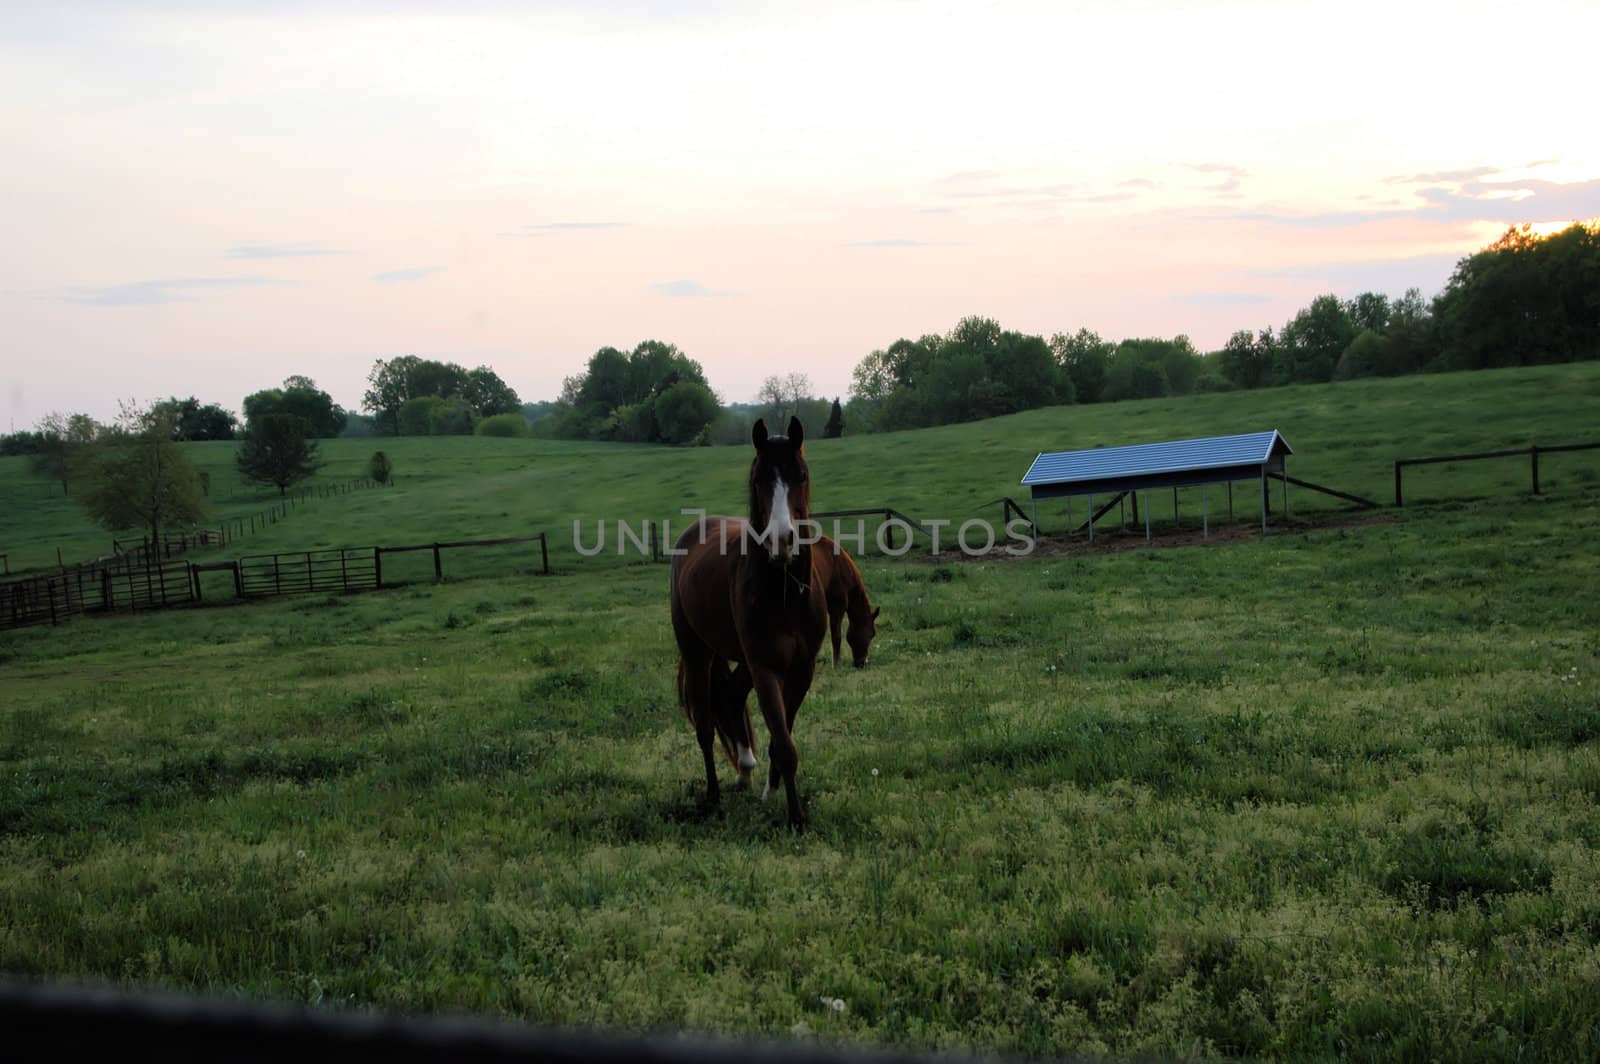 A horse farm in the evening as it closes down for the day